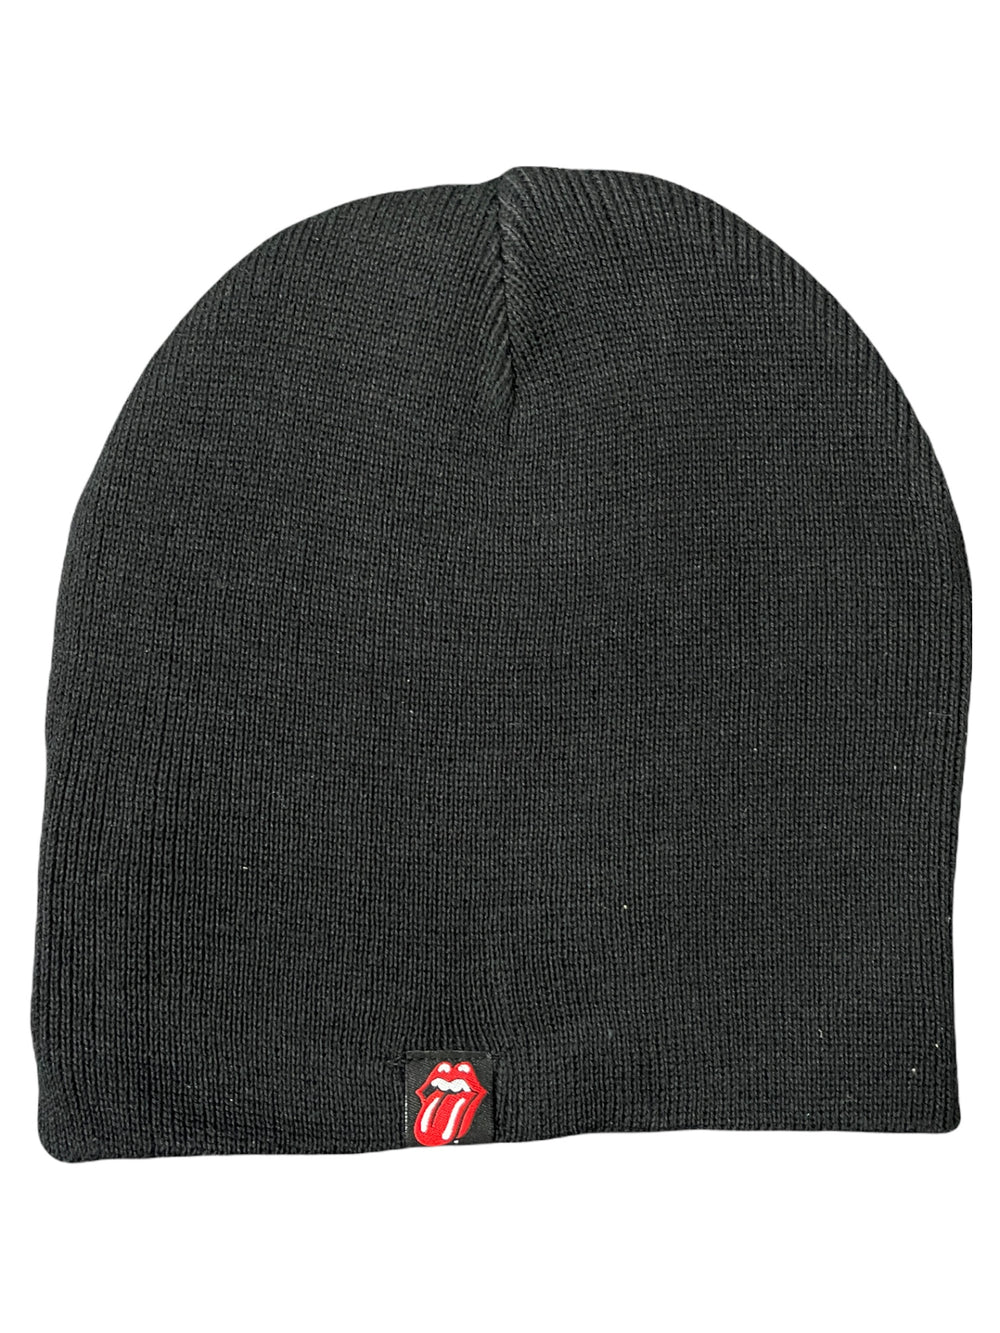 Rolling Stones The - Raised Logo Embroidery Official Beanie Hat One Size Fits All NEW